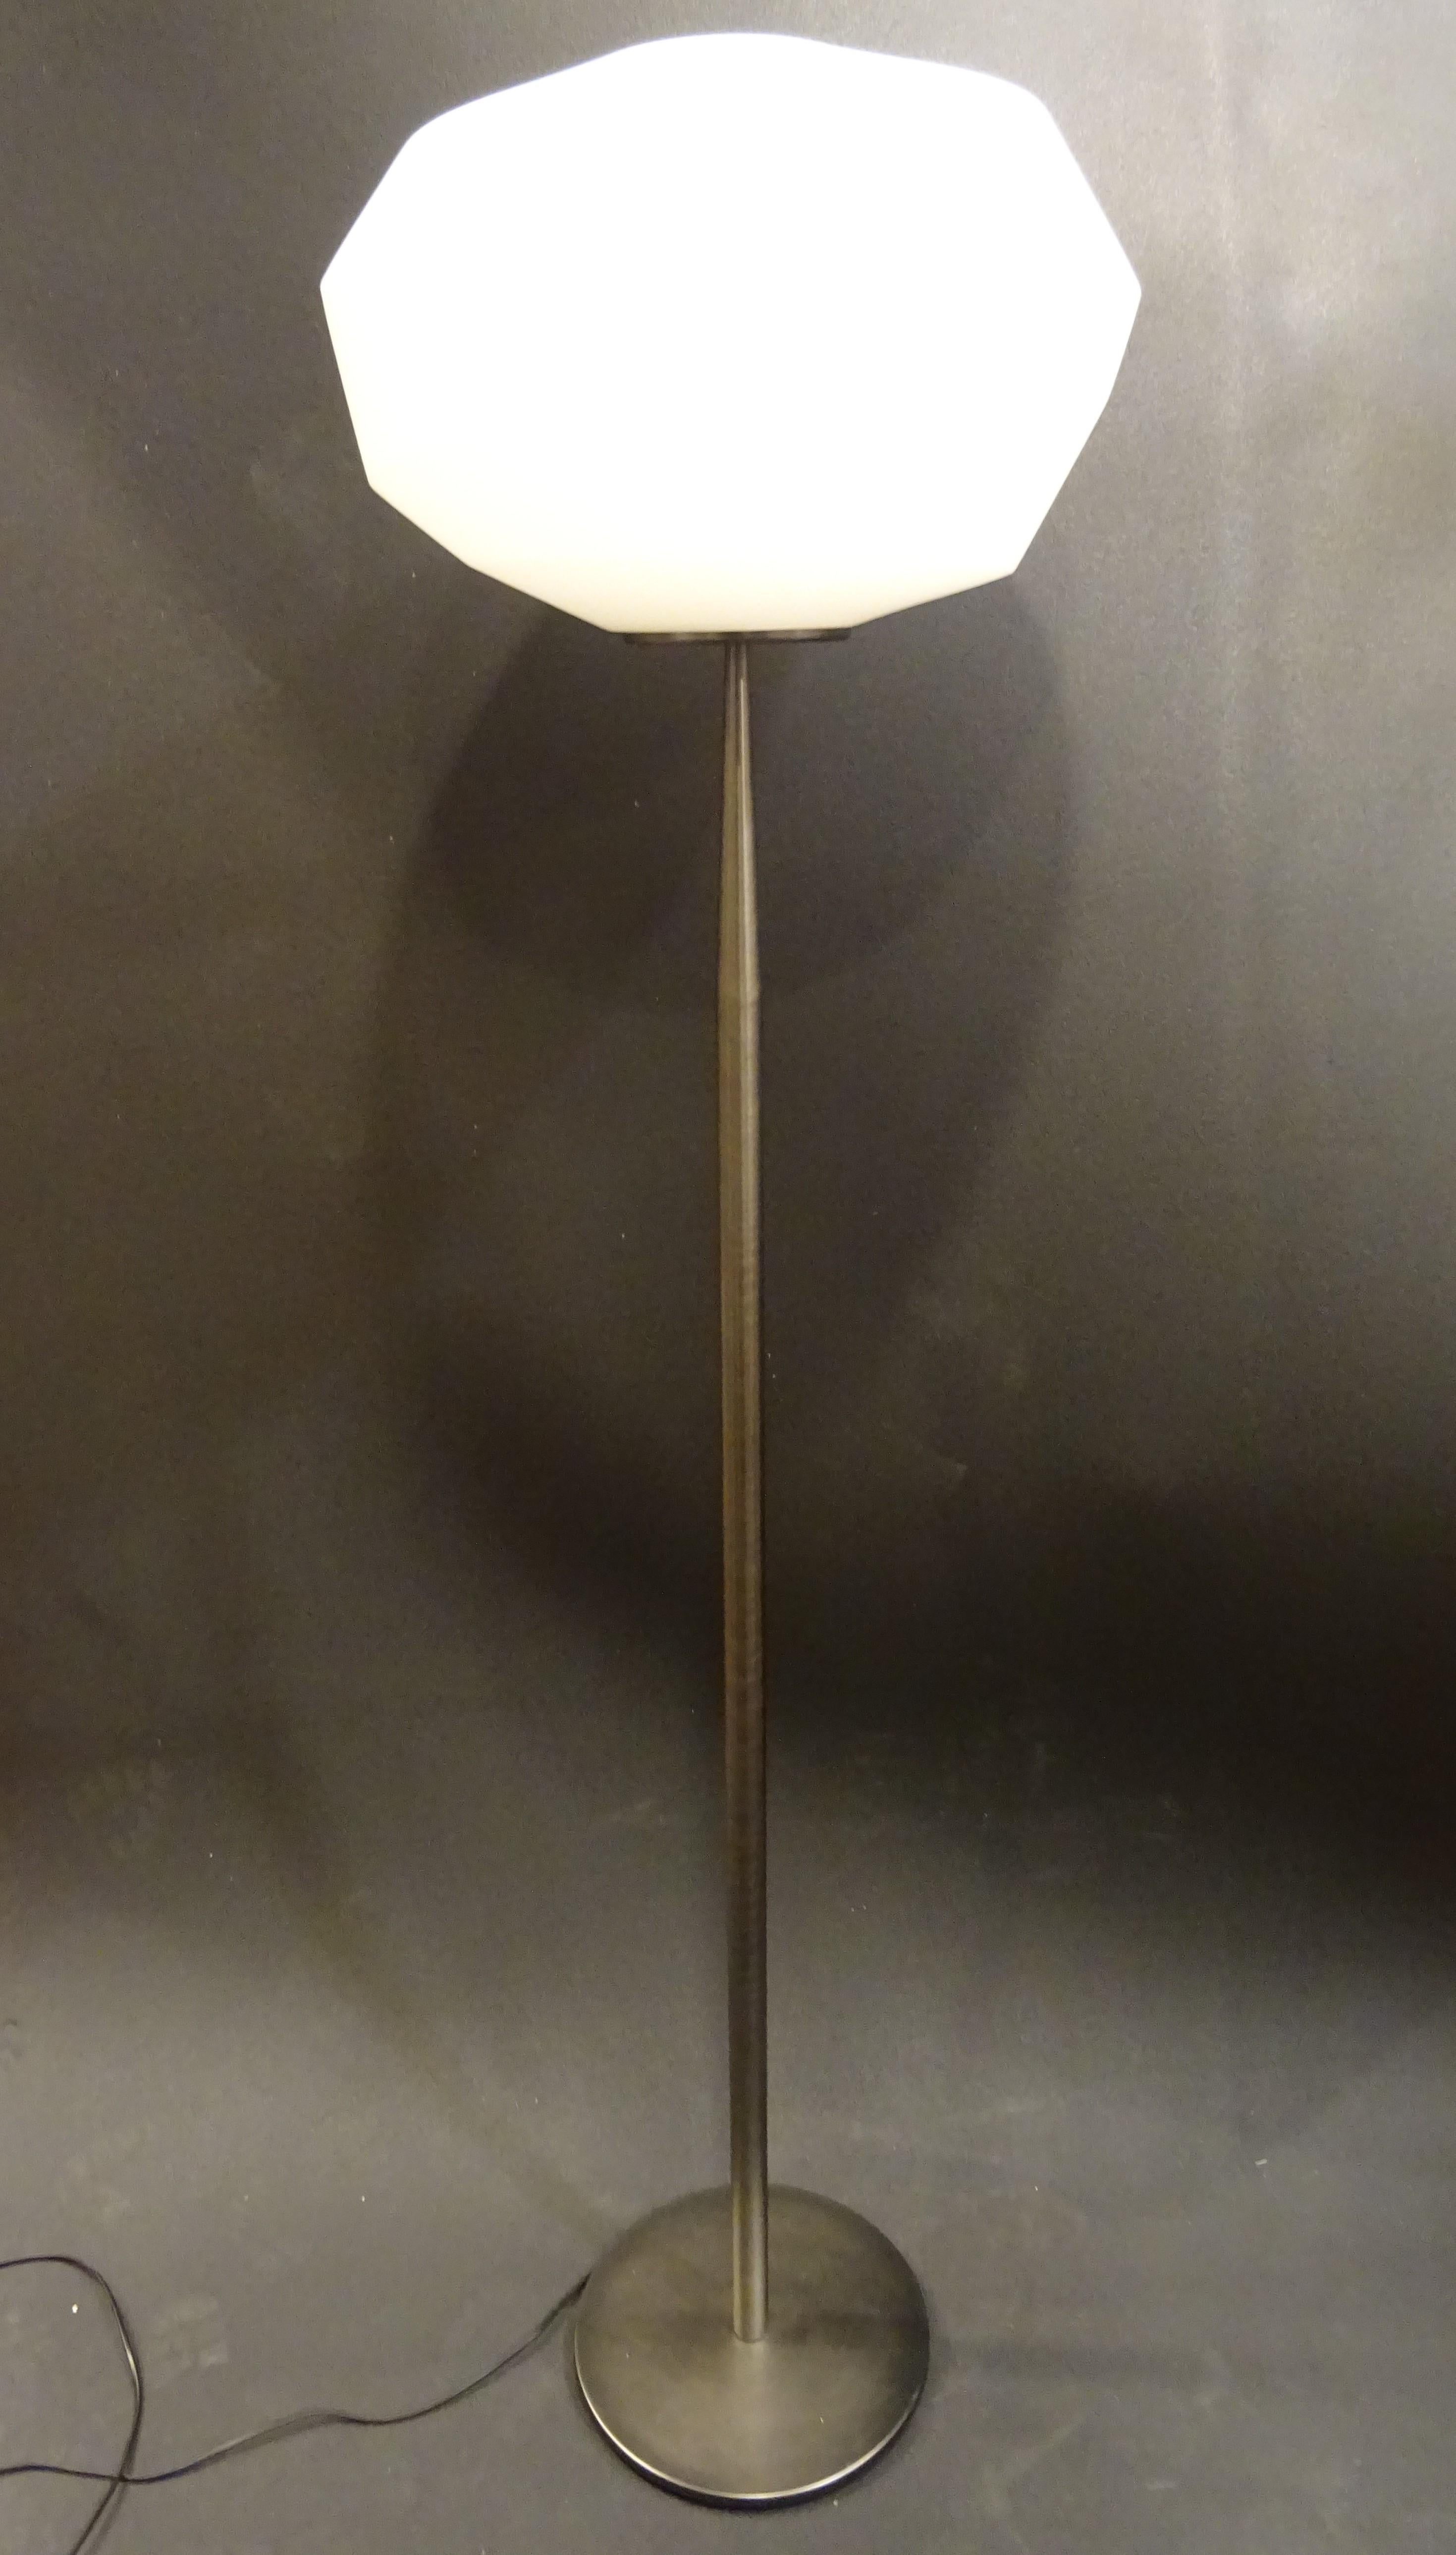 Natuzzi Italian Blown Glass in Mat White and Polished Steel Floor Lamp For Sale 2